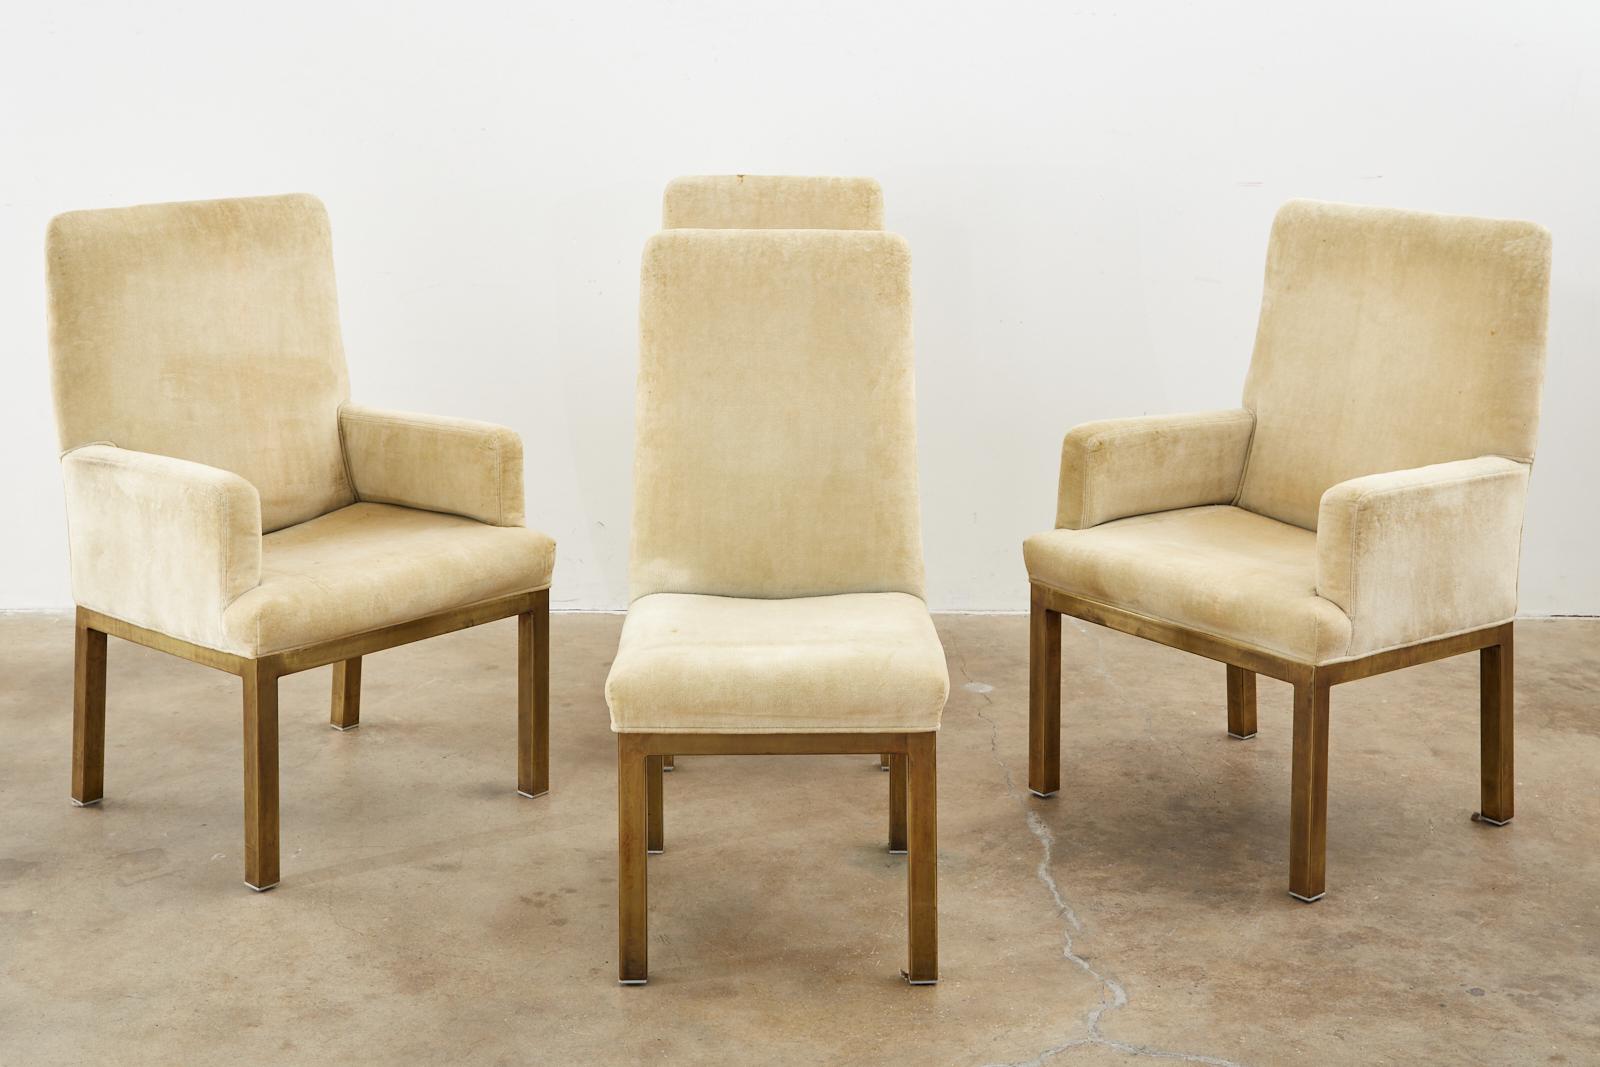 Distinctive set of four Mid-Century Modern dining chairs by Mastercraft. The set consists of two side chairs and two armchairs. The side chairs measure: 19 inches wide by 23 inches deep. The chairs feature a bronzed frame with a rich patina. Very